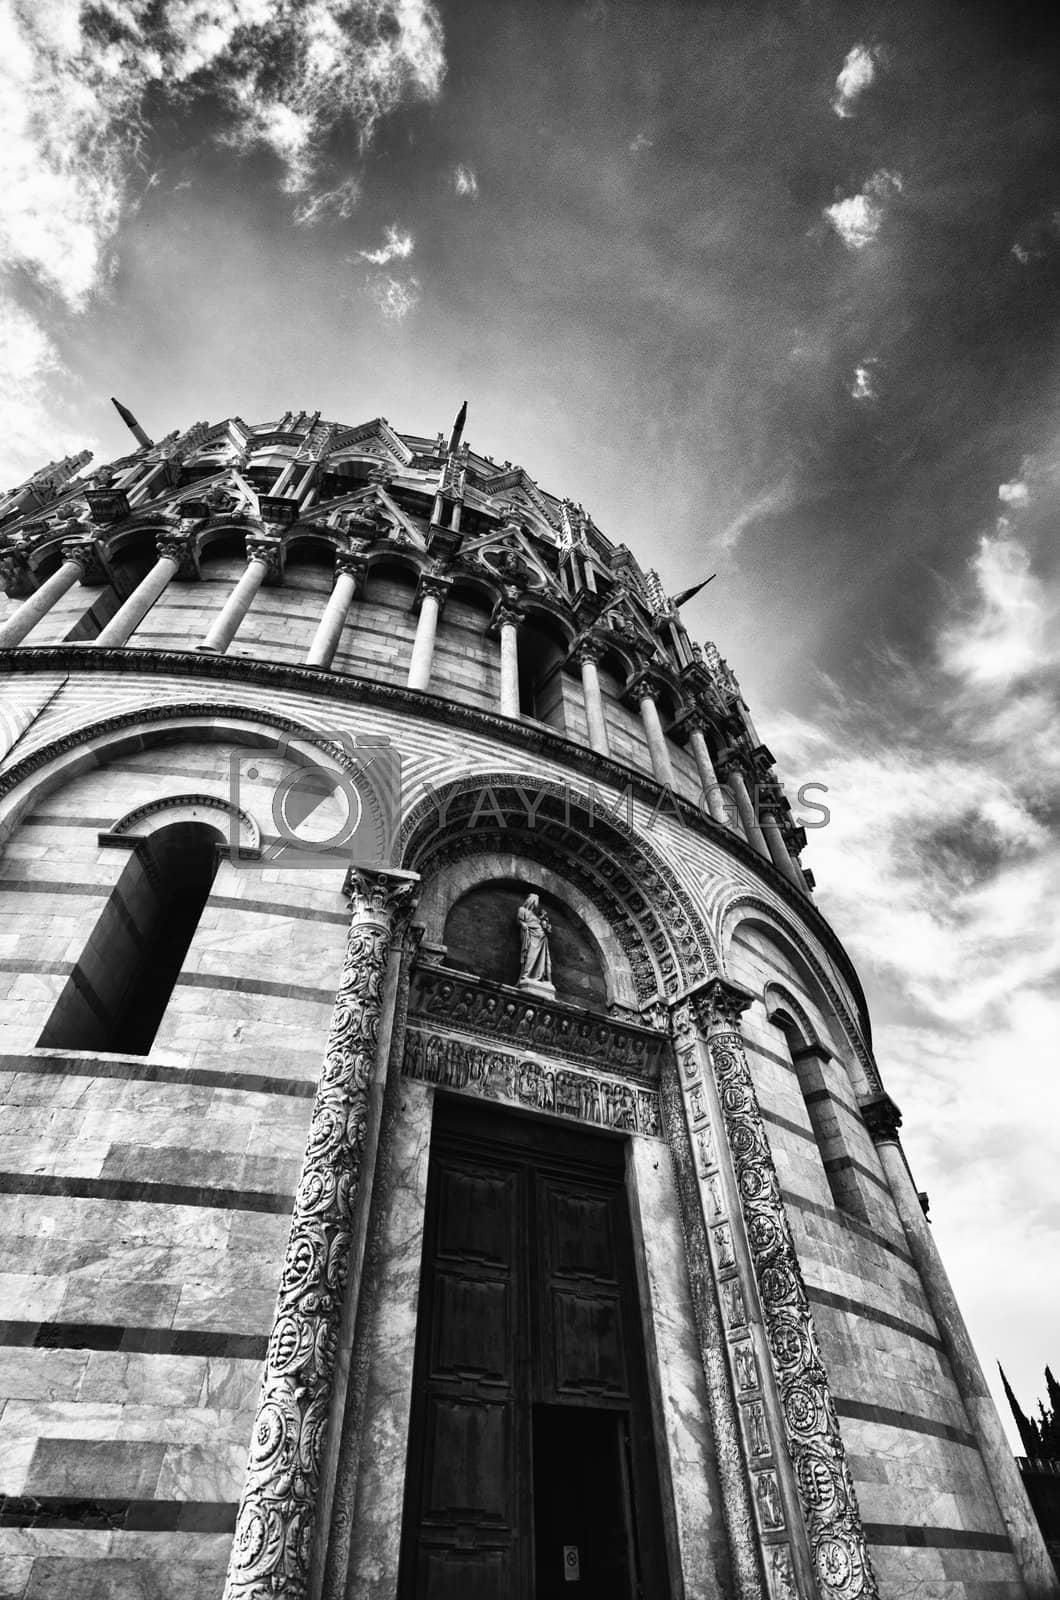 Royalty free image of Romanesque style Baptistery in Pisa, Italy by jovannig